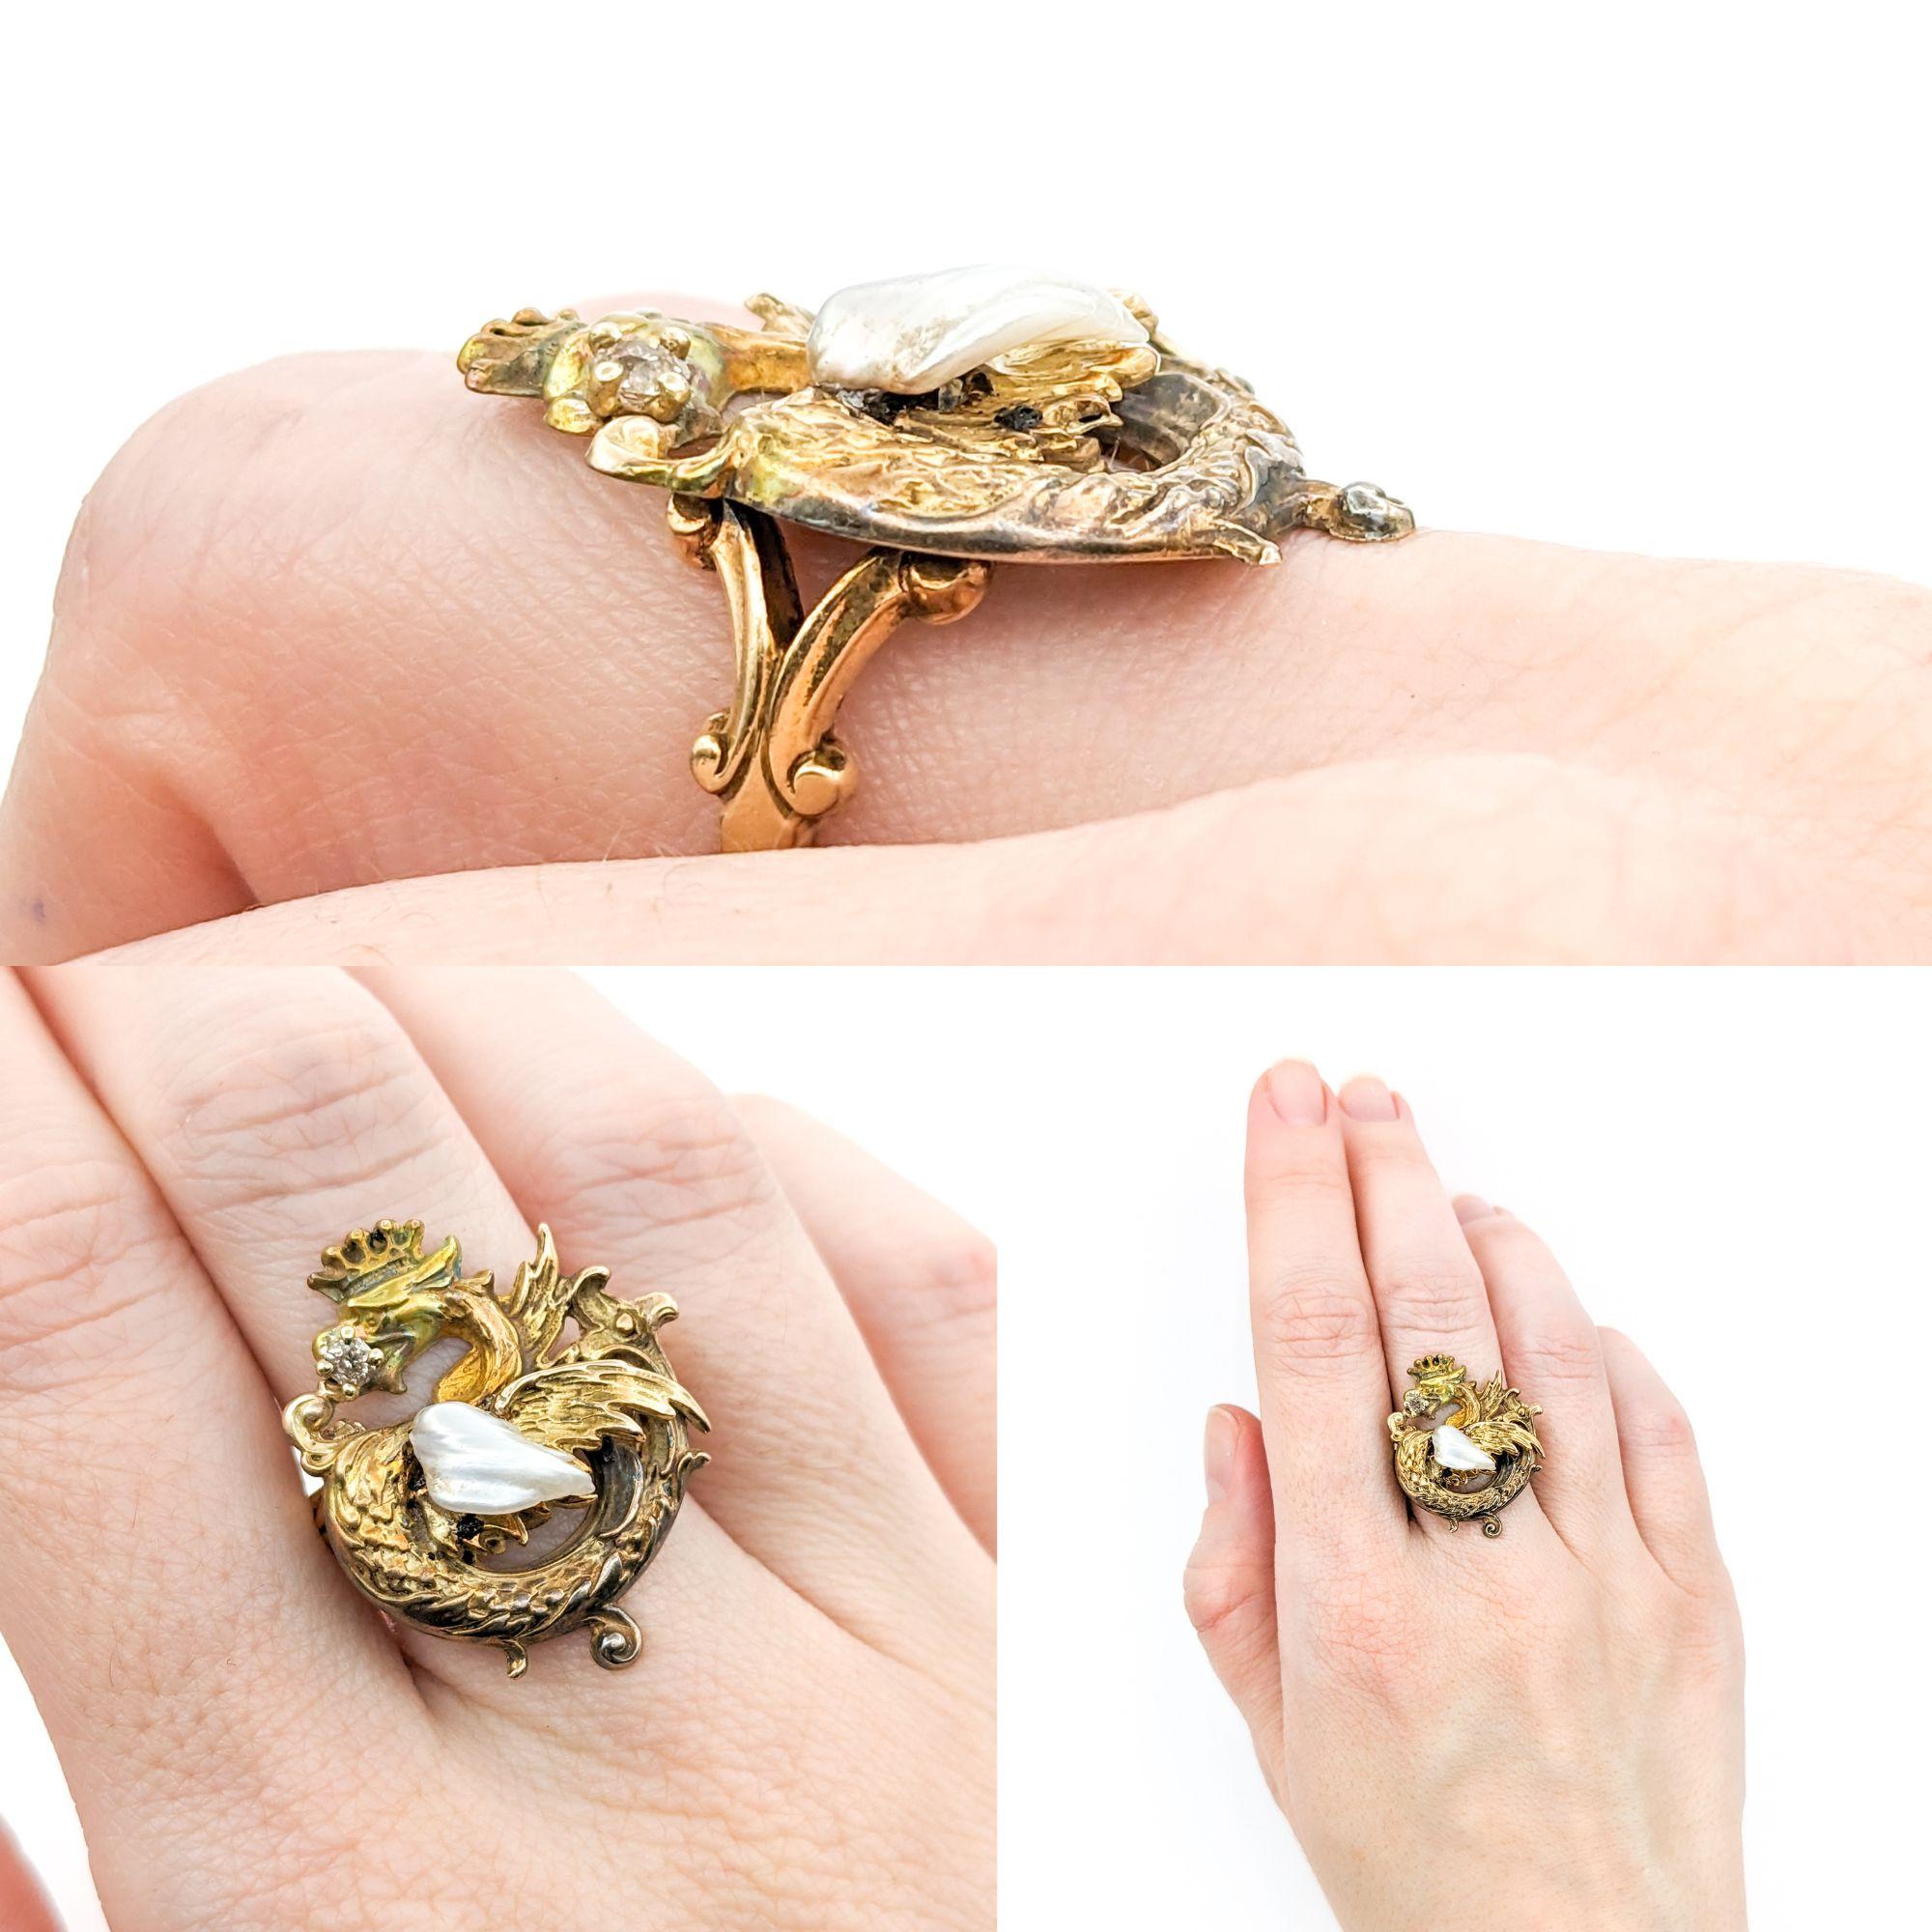 Art Nouveau Era Diamond & Pearl Ring In Yellow Gold

Immerse yourself in the enchanting beauty of the Art Nouveau era with this exquisite dragon ring, skillfully crafted in 12k yellow gold. This piece is a remarkable representation of the Art